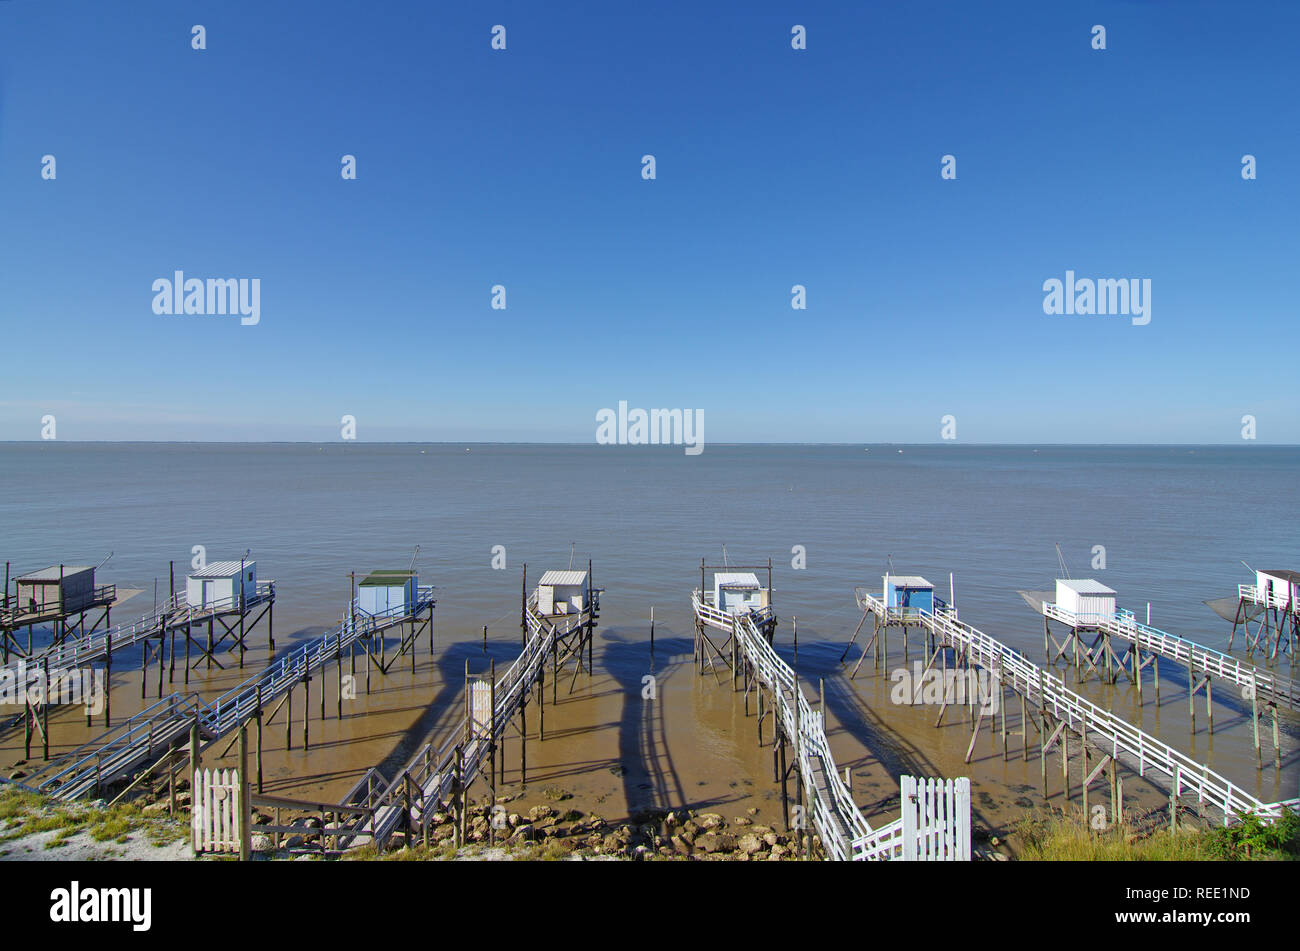 Fishing cabins in the Gironde estuary. West coast of France. Talmont sur Gironde Stock Photo